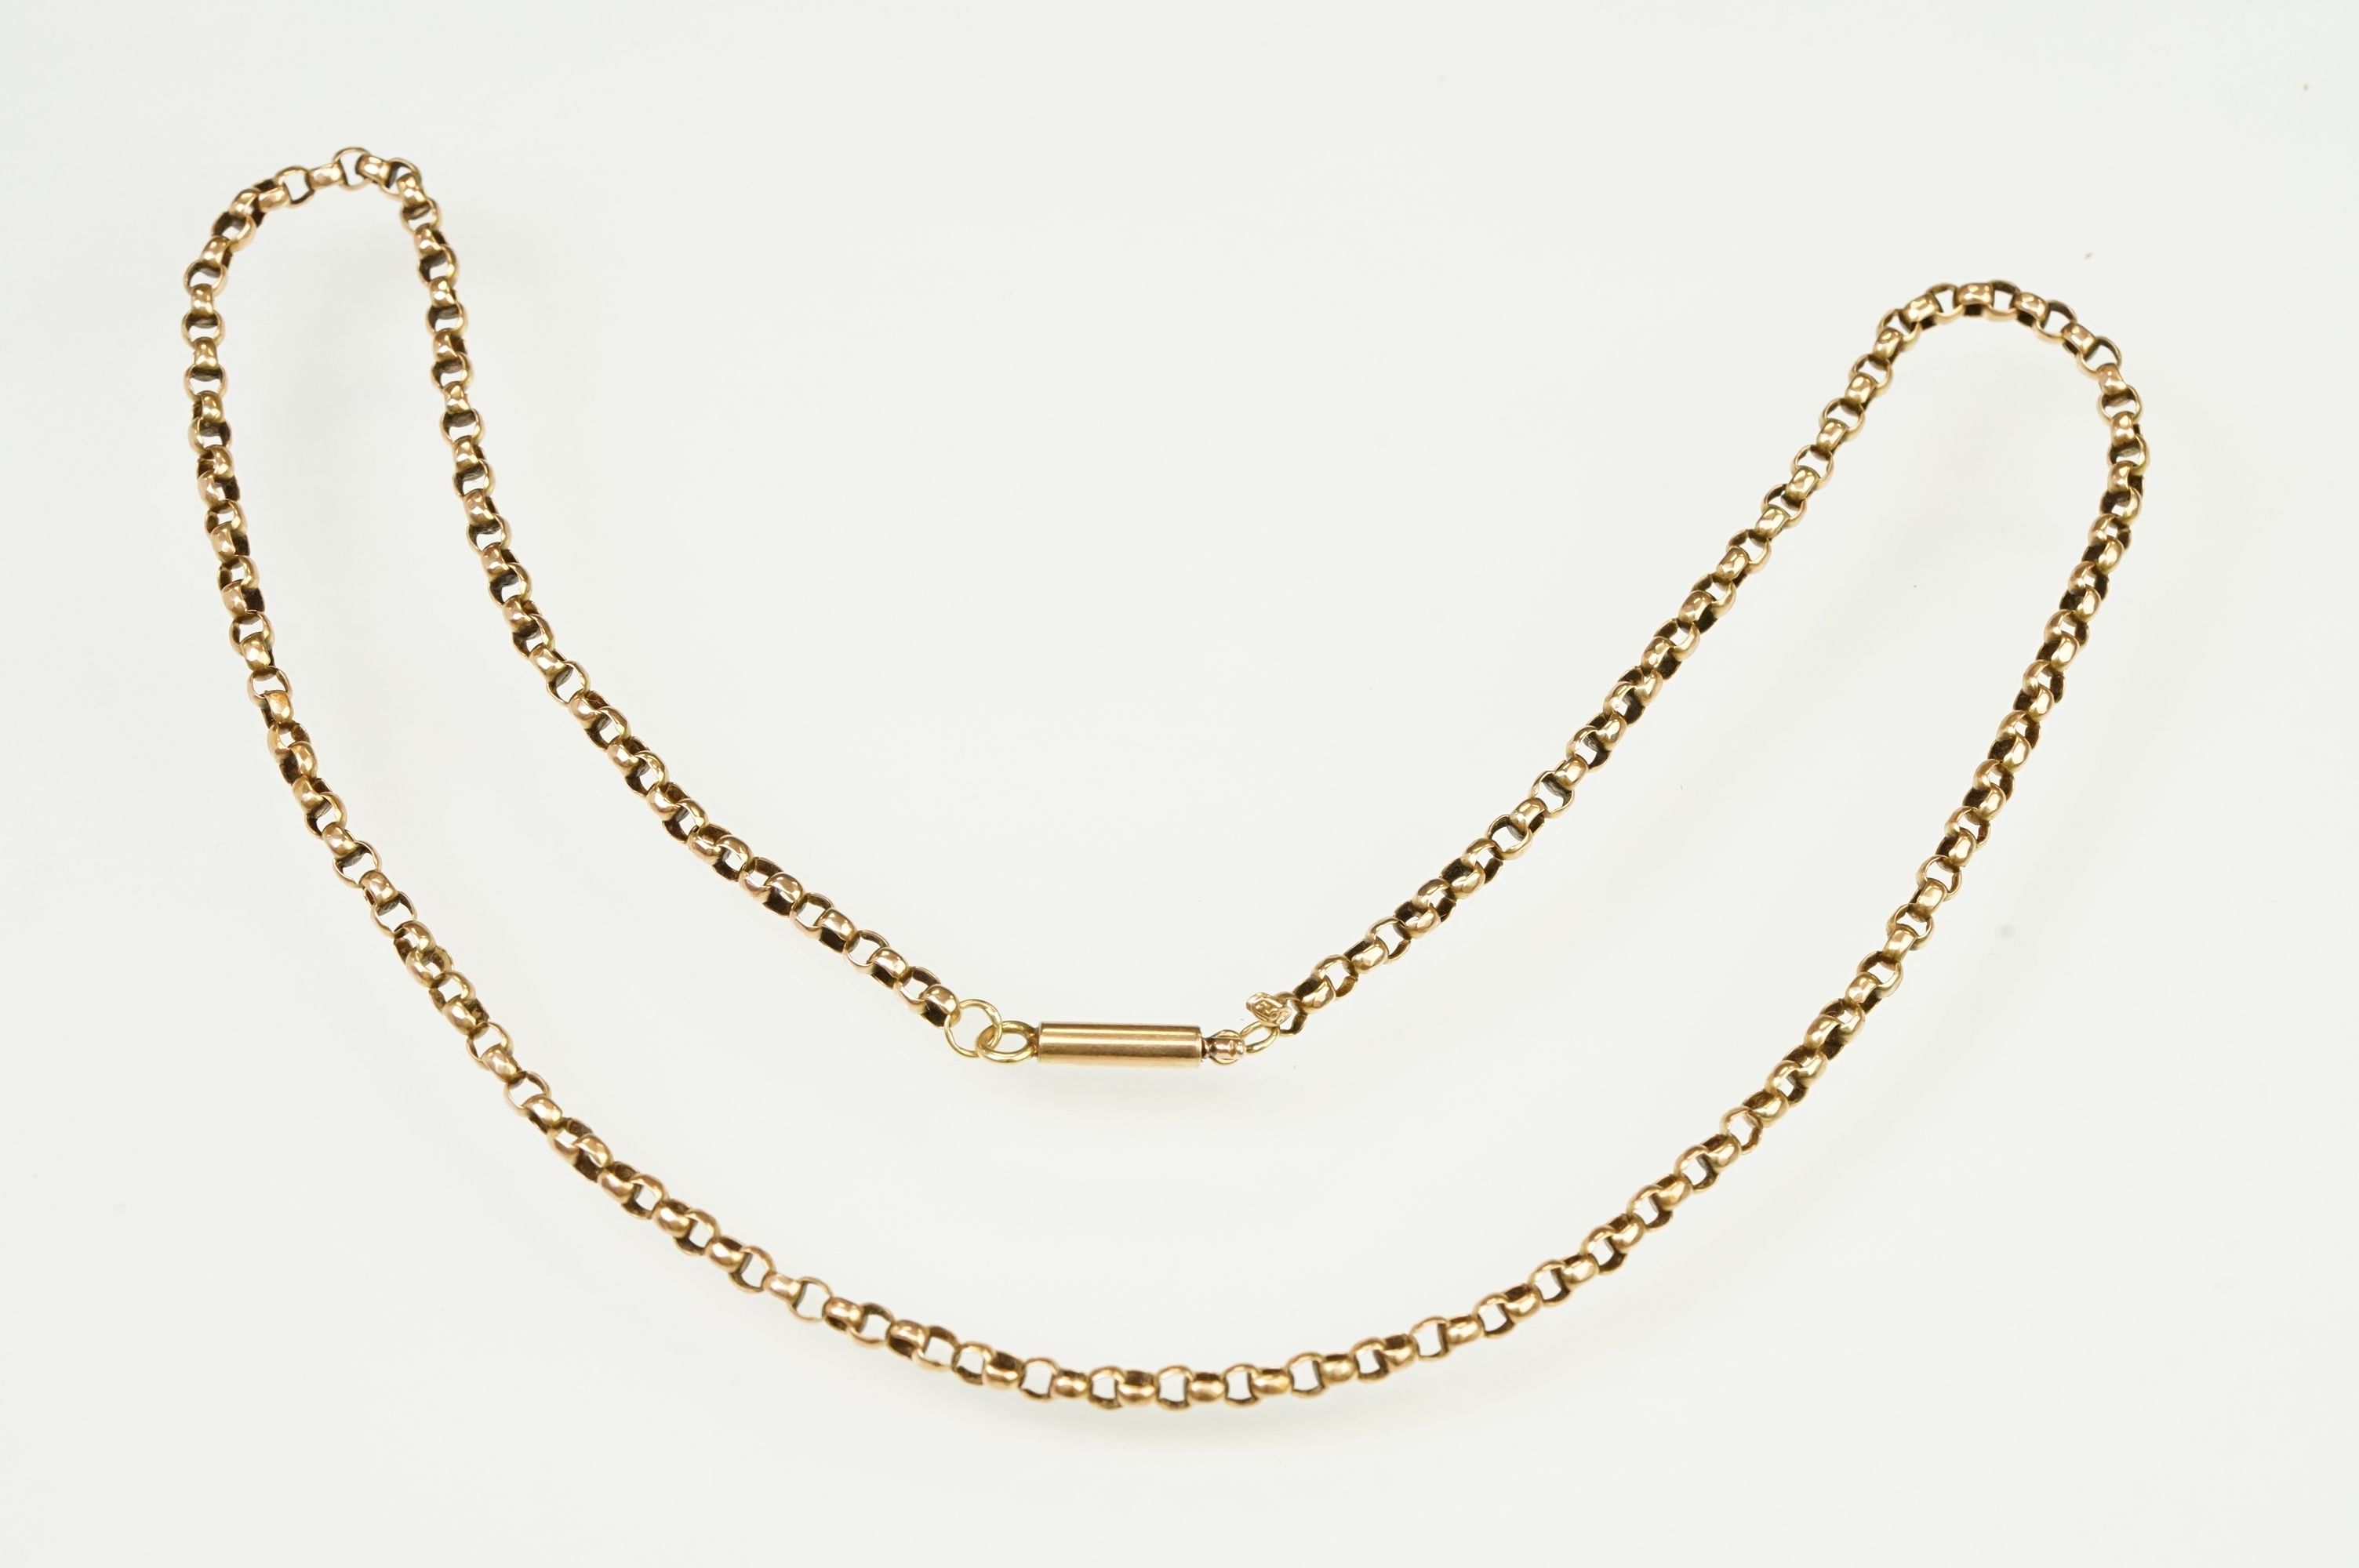 Early 20th Century antique 9ct gold belcher link necklace chain with cylinder clasp. Marked 9ct to